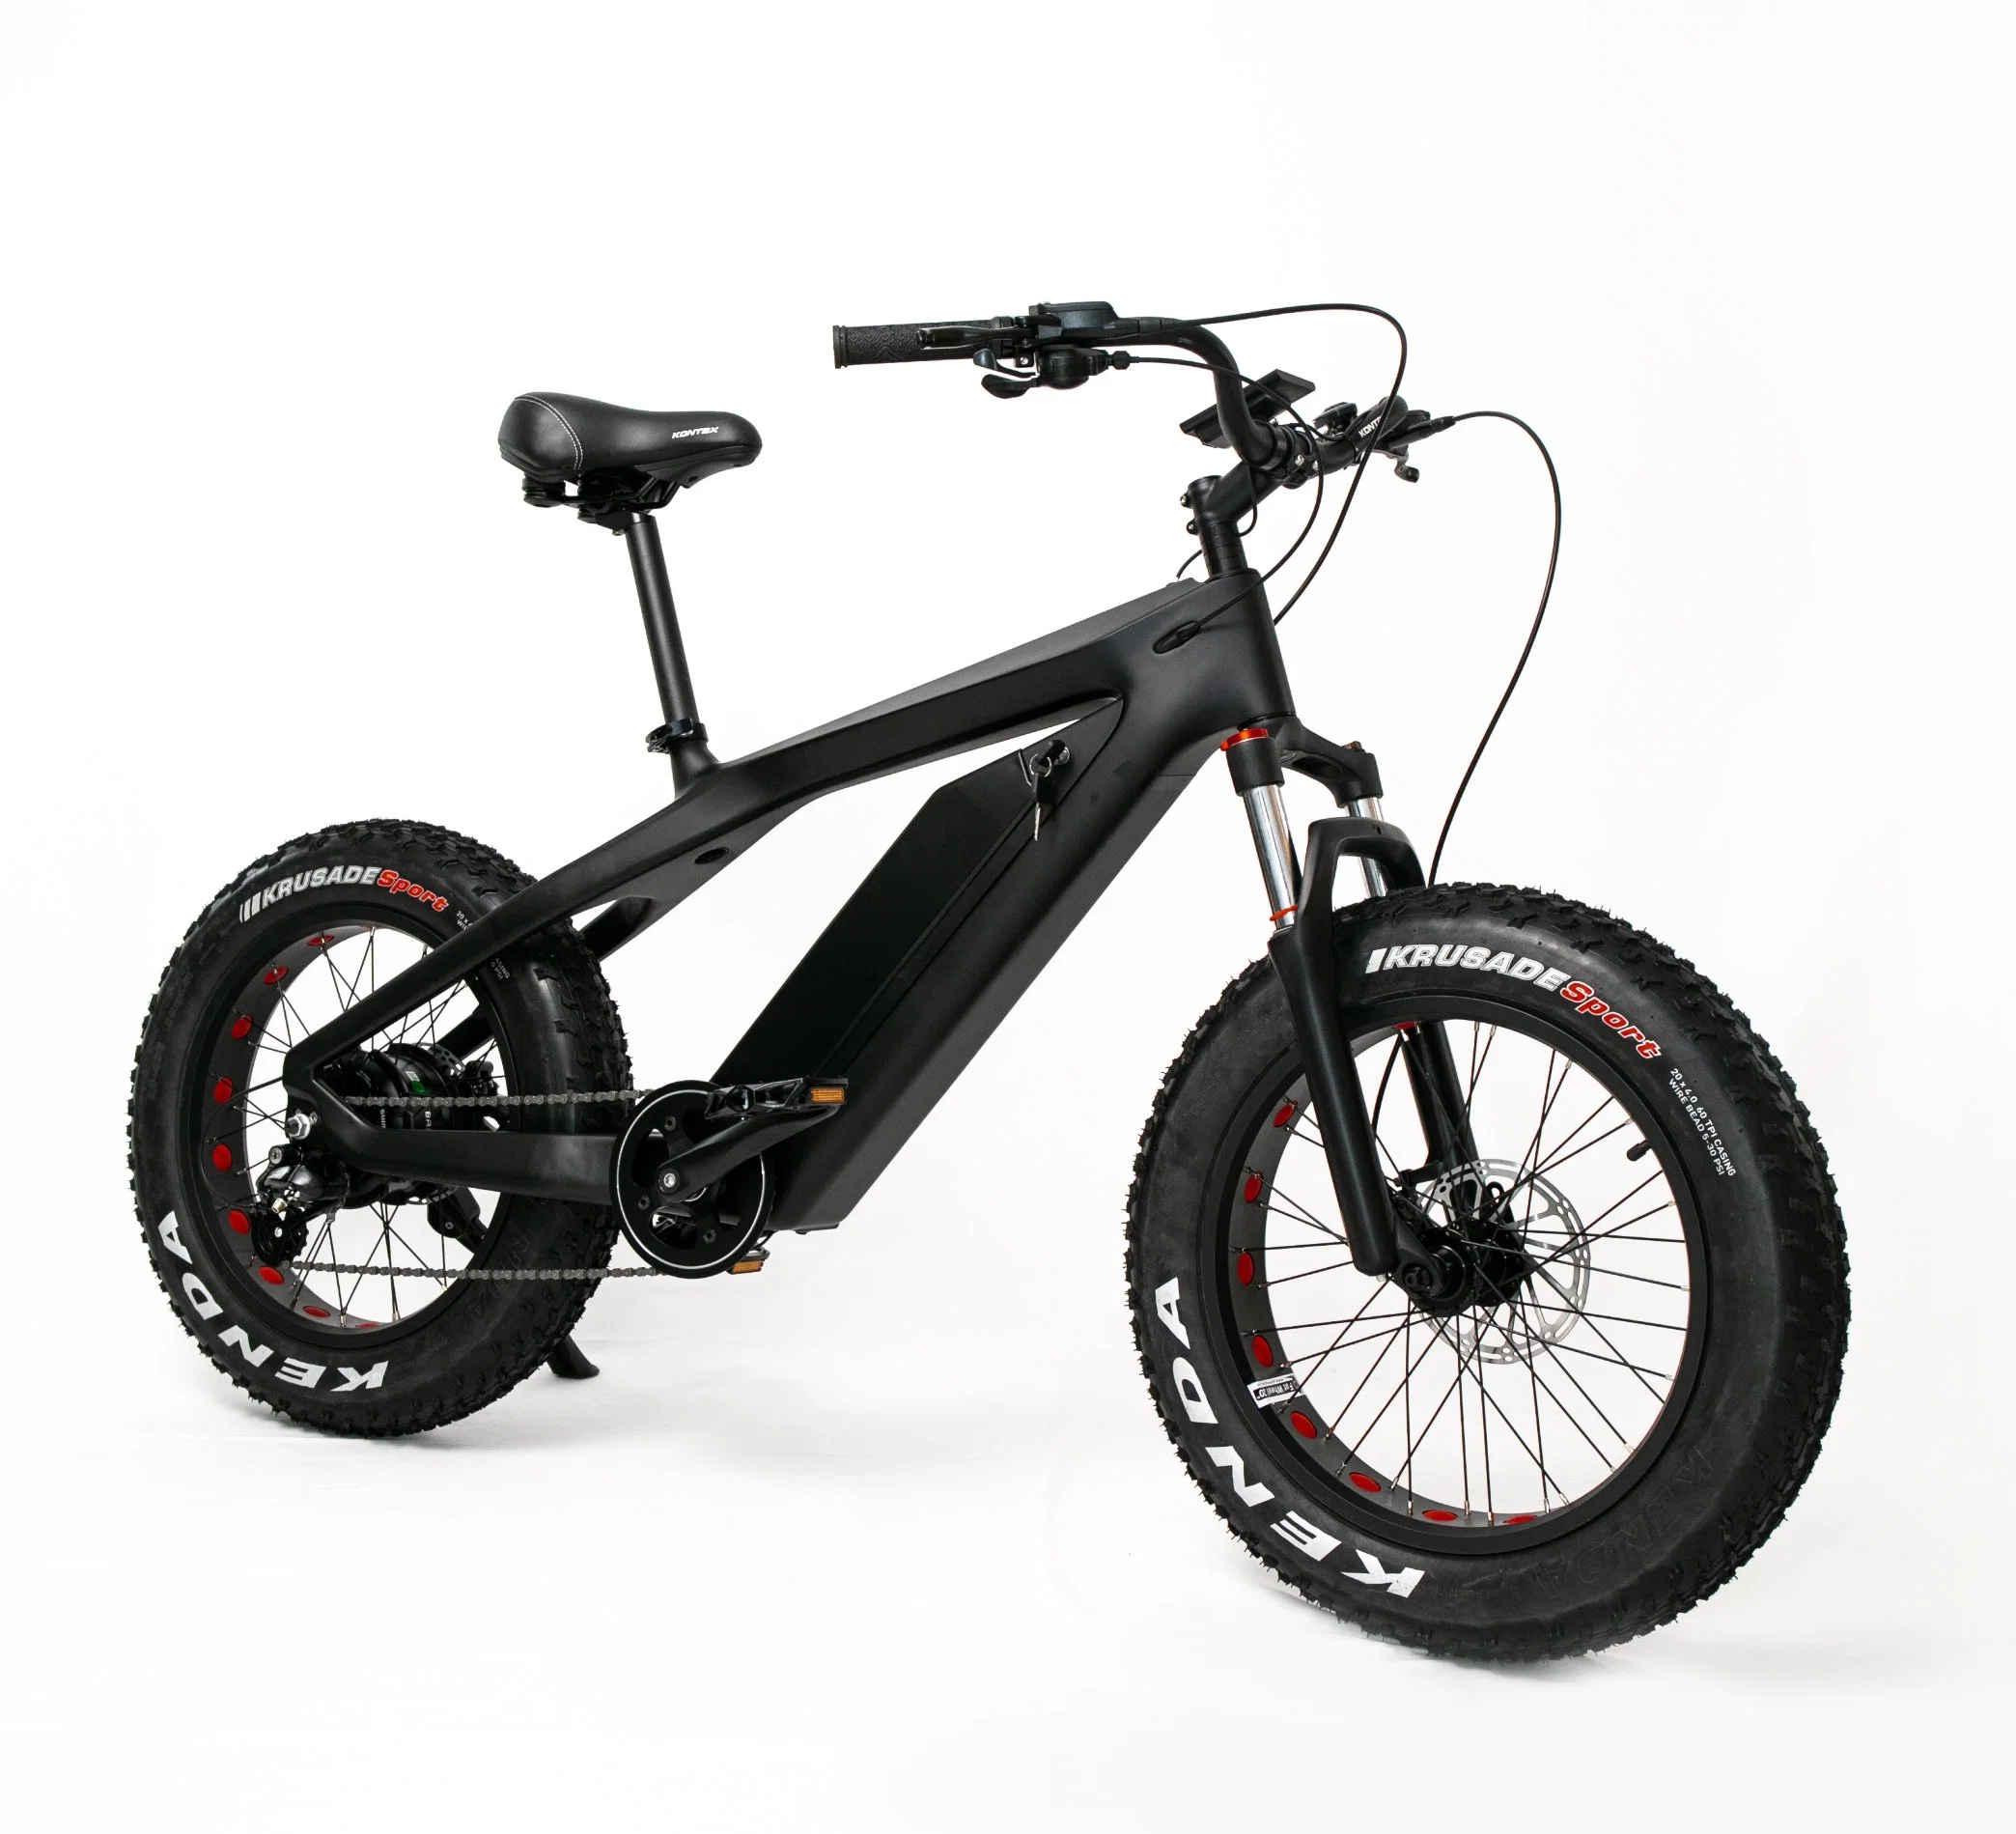 48V700W Big Power Fat Tire E Bike High Speeds Electric Bicycle Mountain Bike Good Price Ebike for Sales